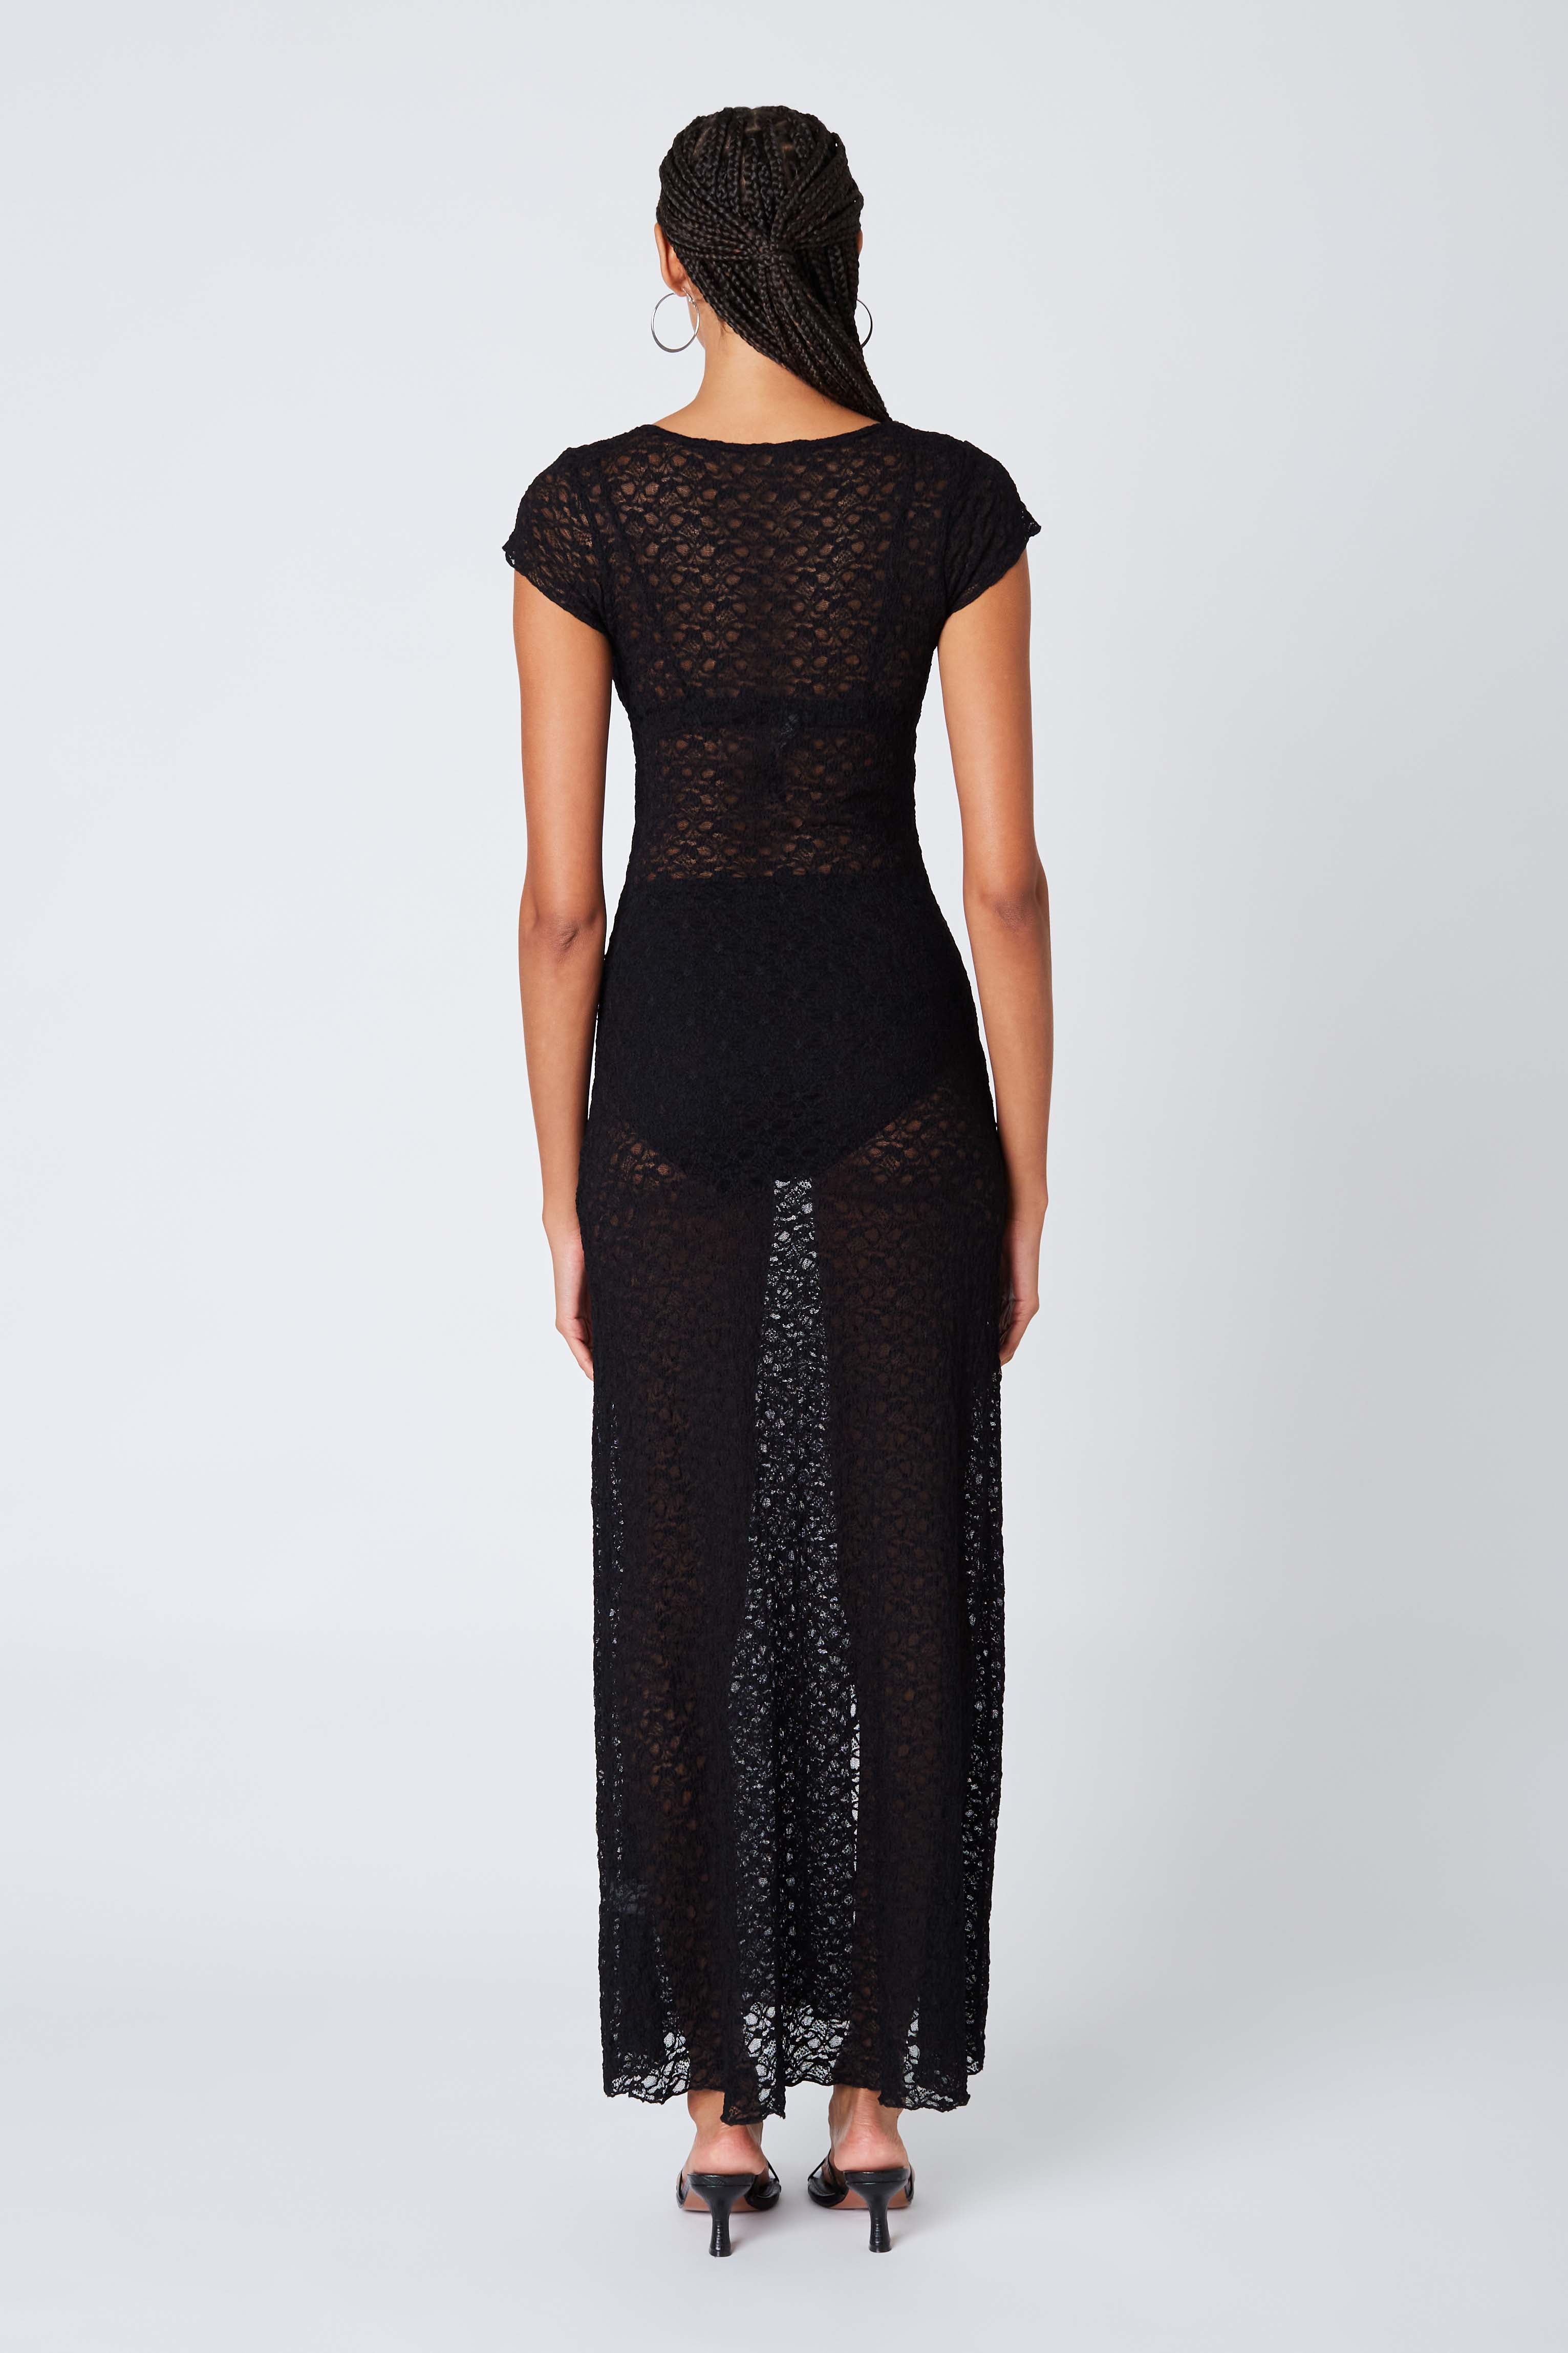 Short Sleeve Lace Maxi Dress in Black Back View